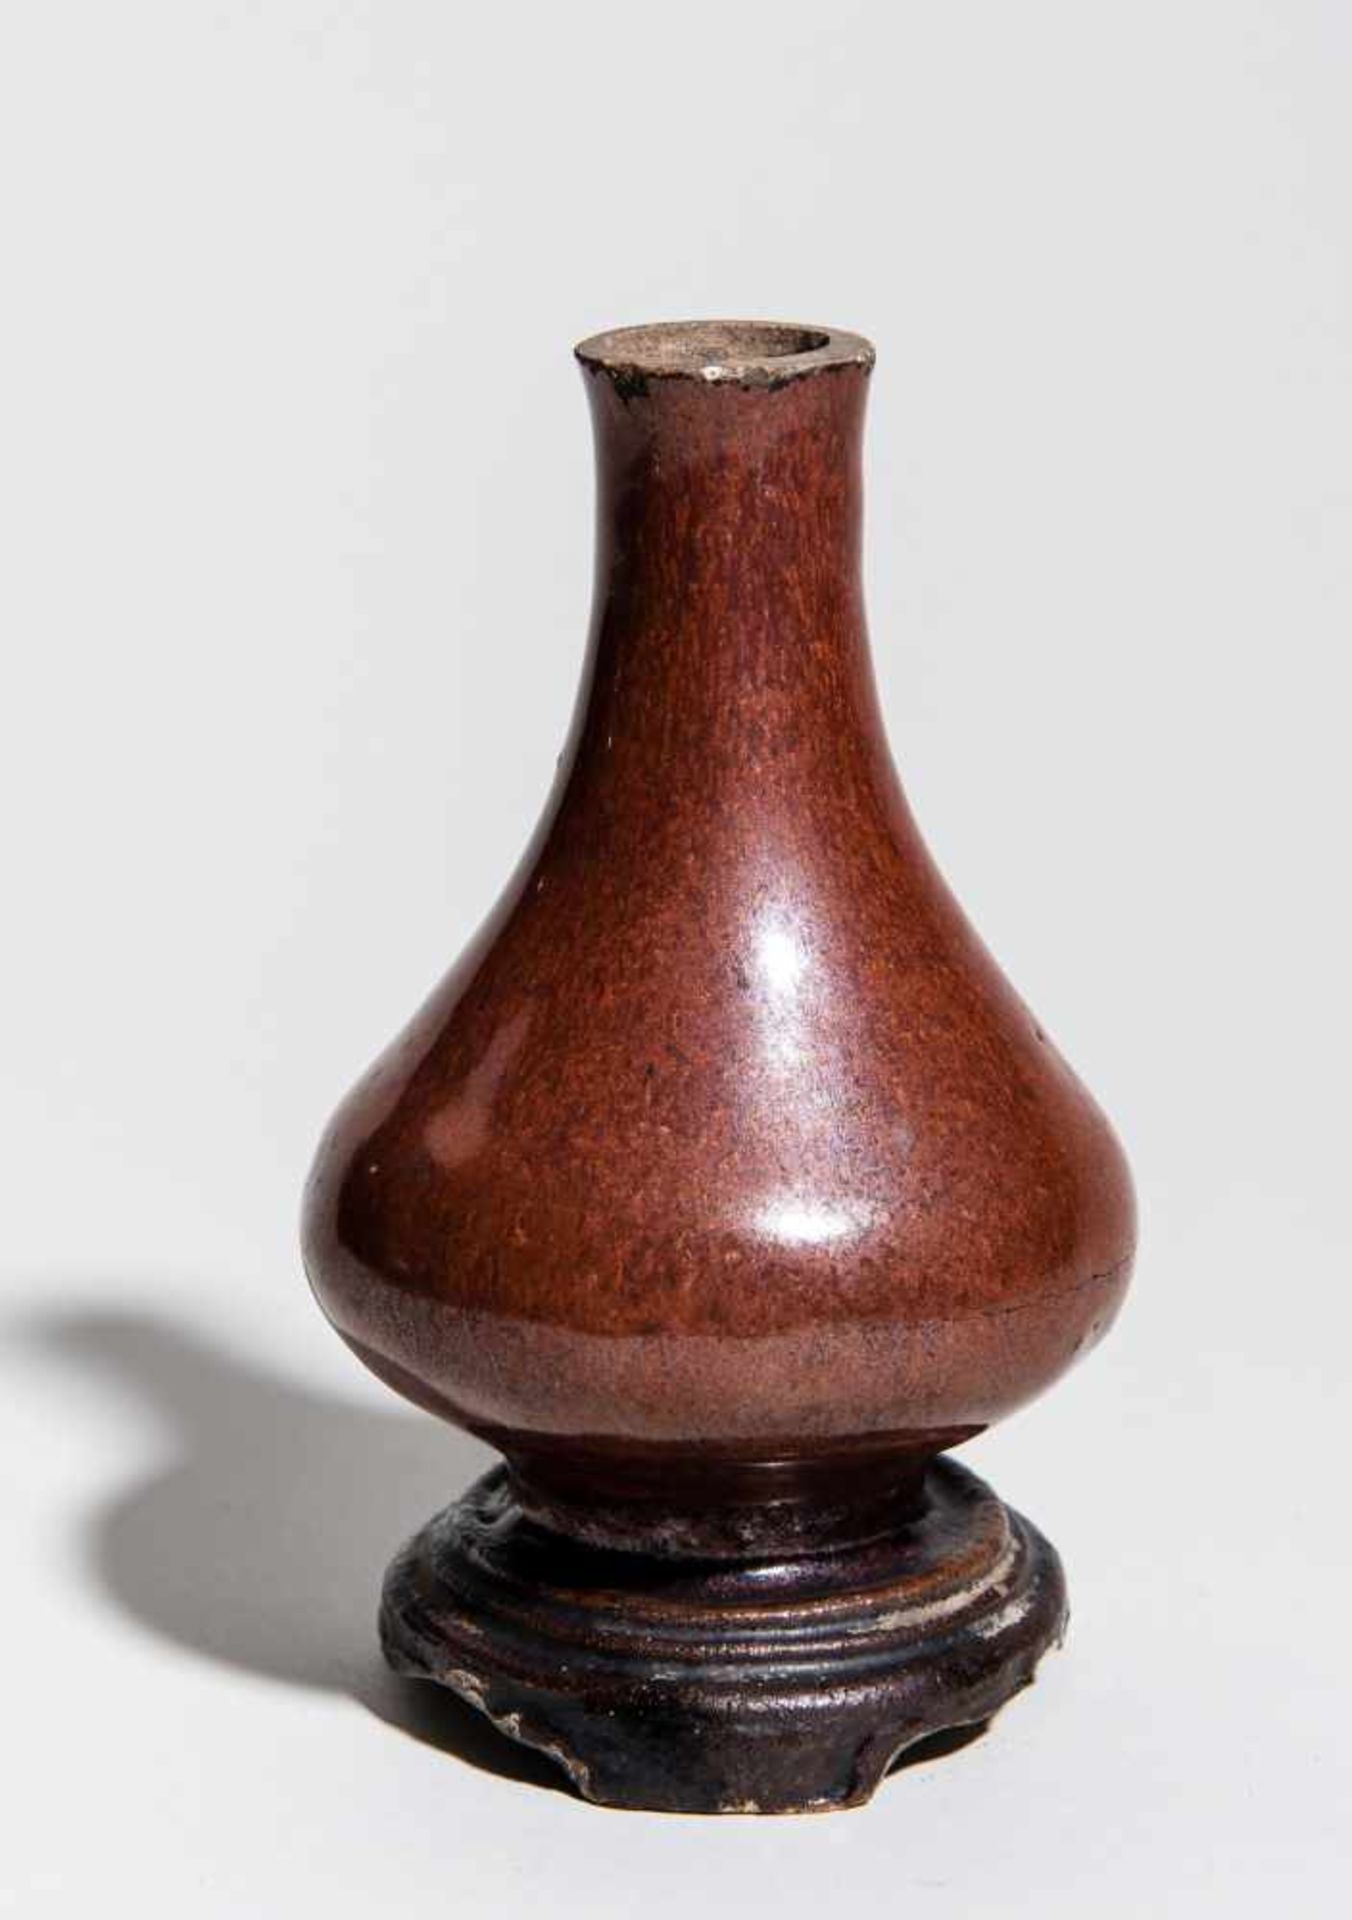 SMALL VASE WITH BASE Stoneware. China, Qing Dynasty (1644-1911) An interesting rare and unusual